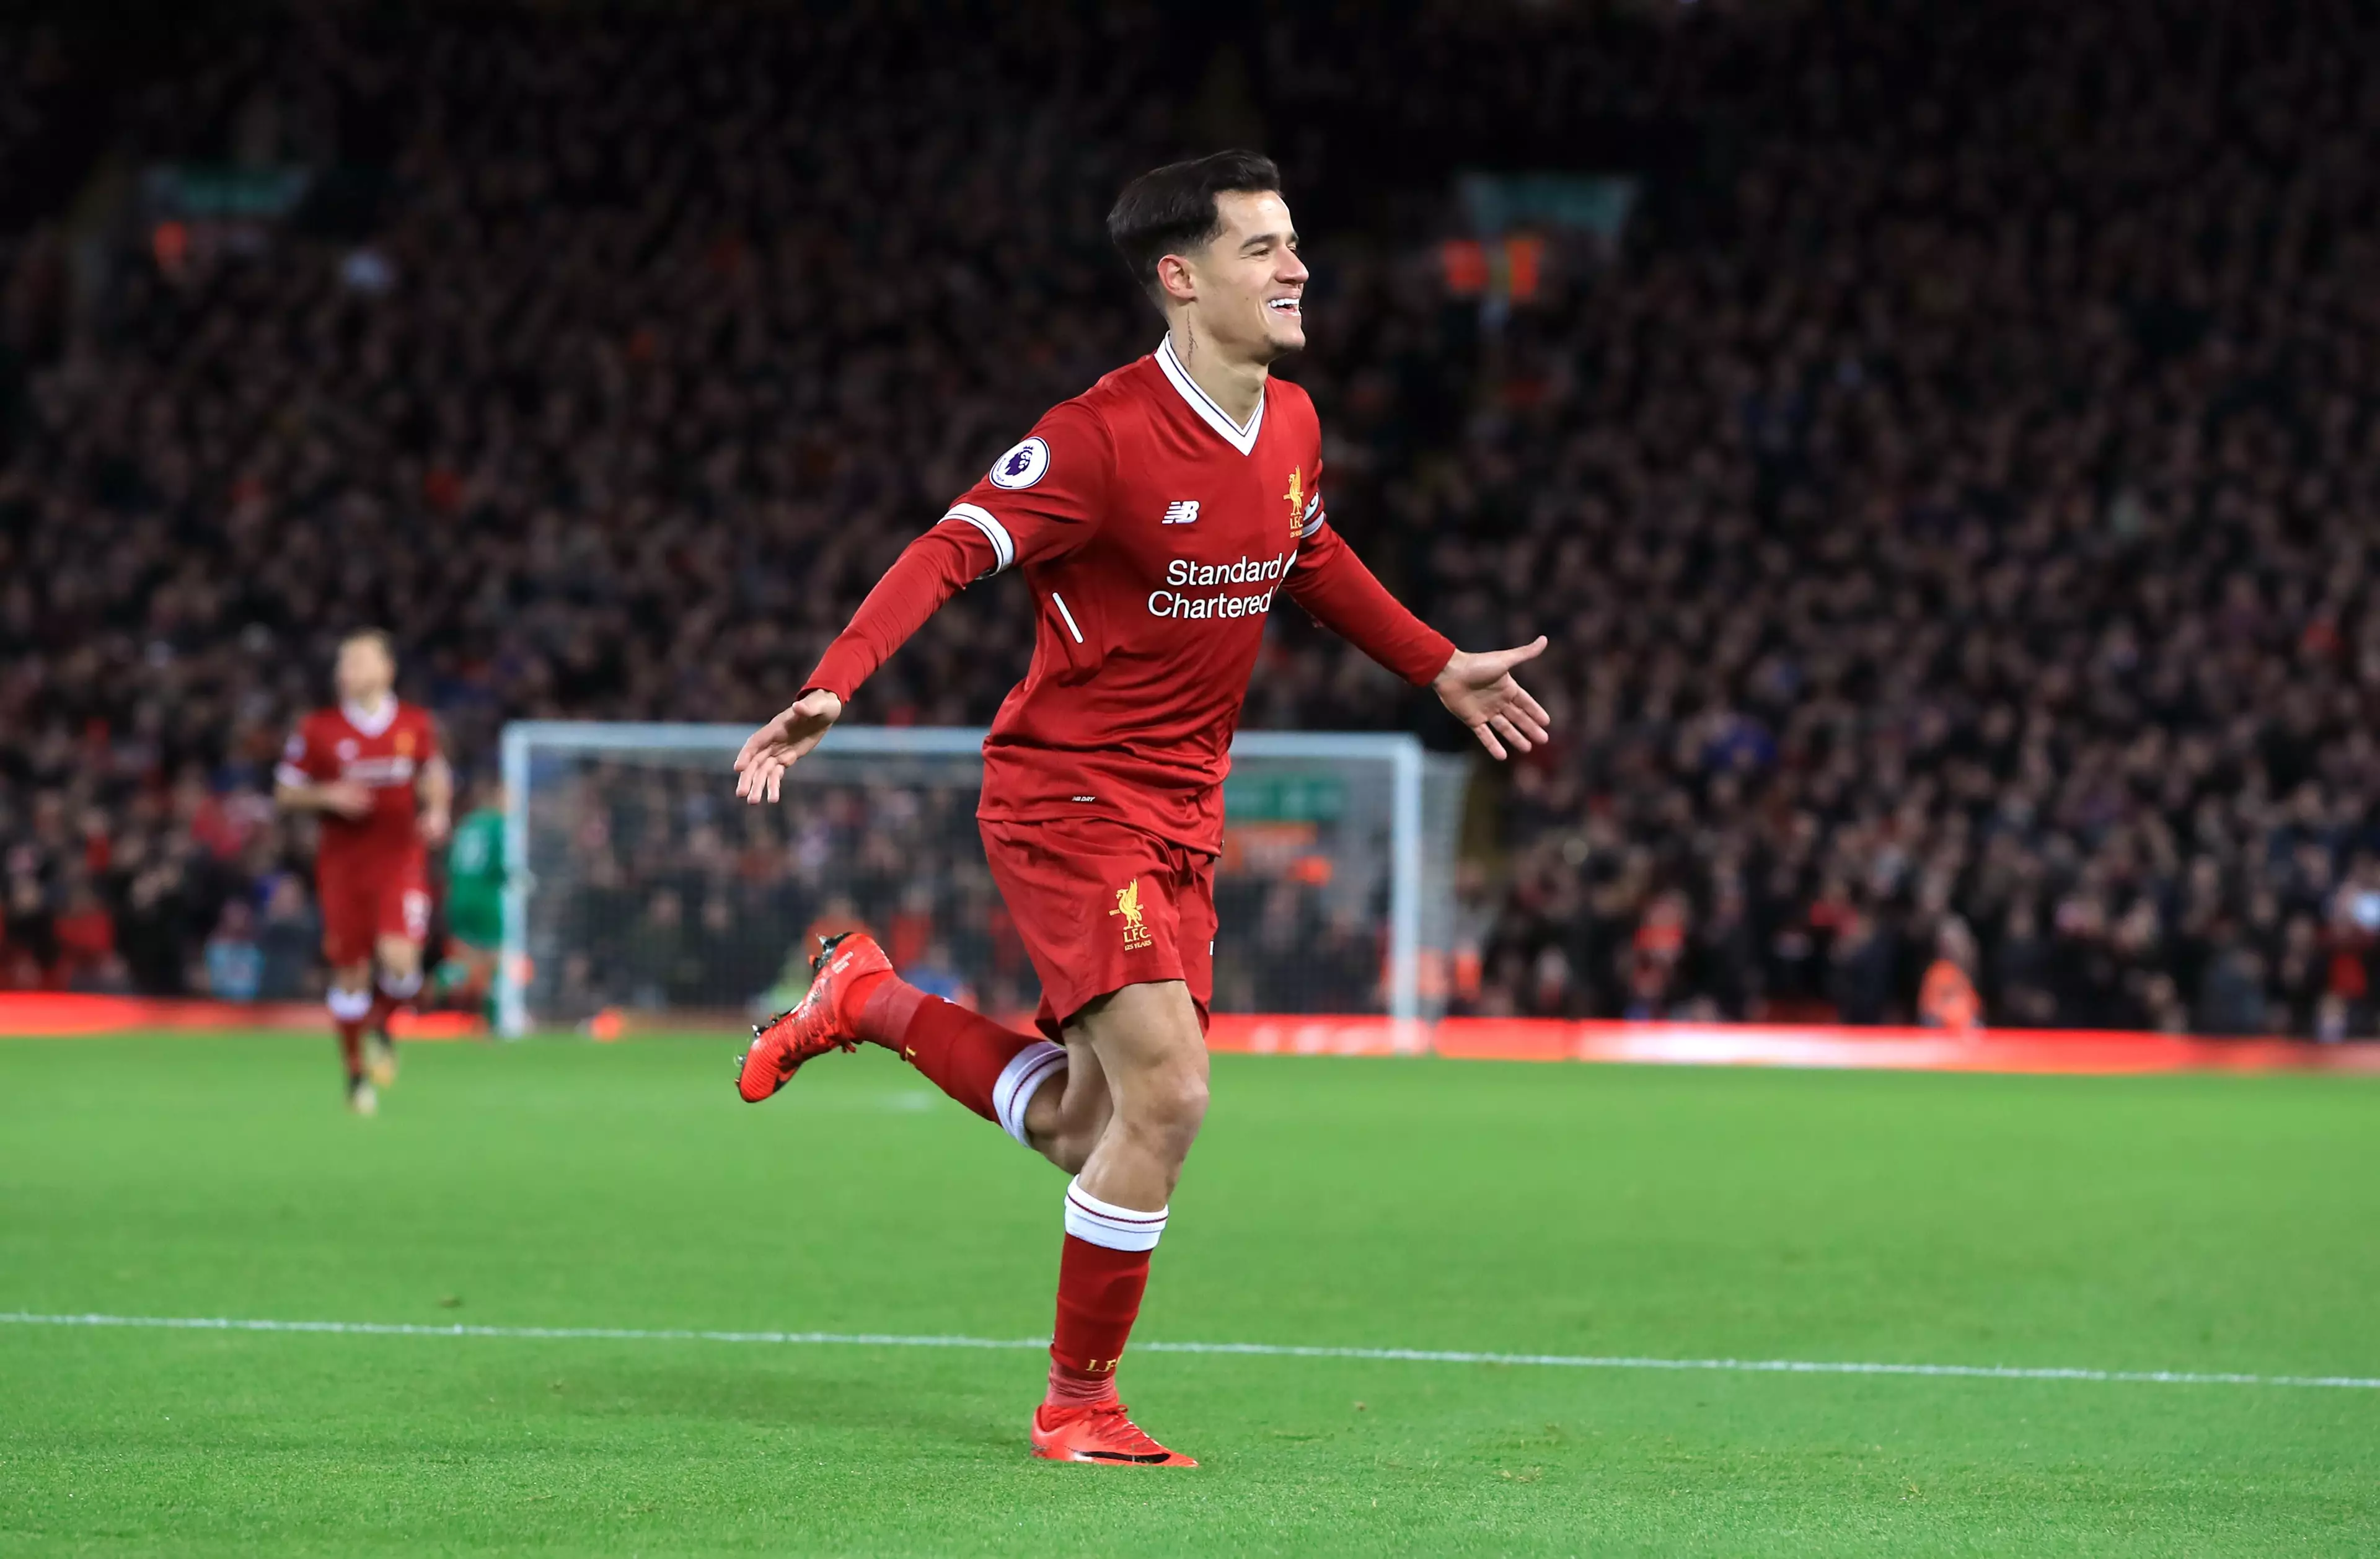 Coutinho looks almost certain to make his move this month. Image: PA Images.